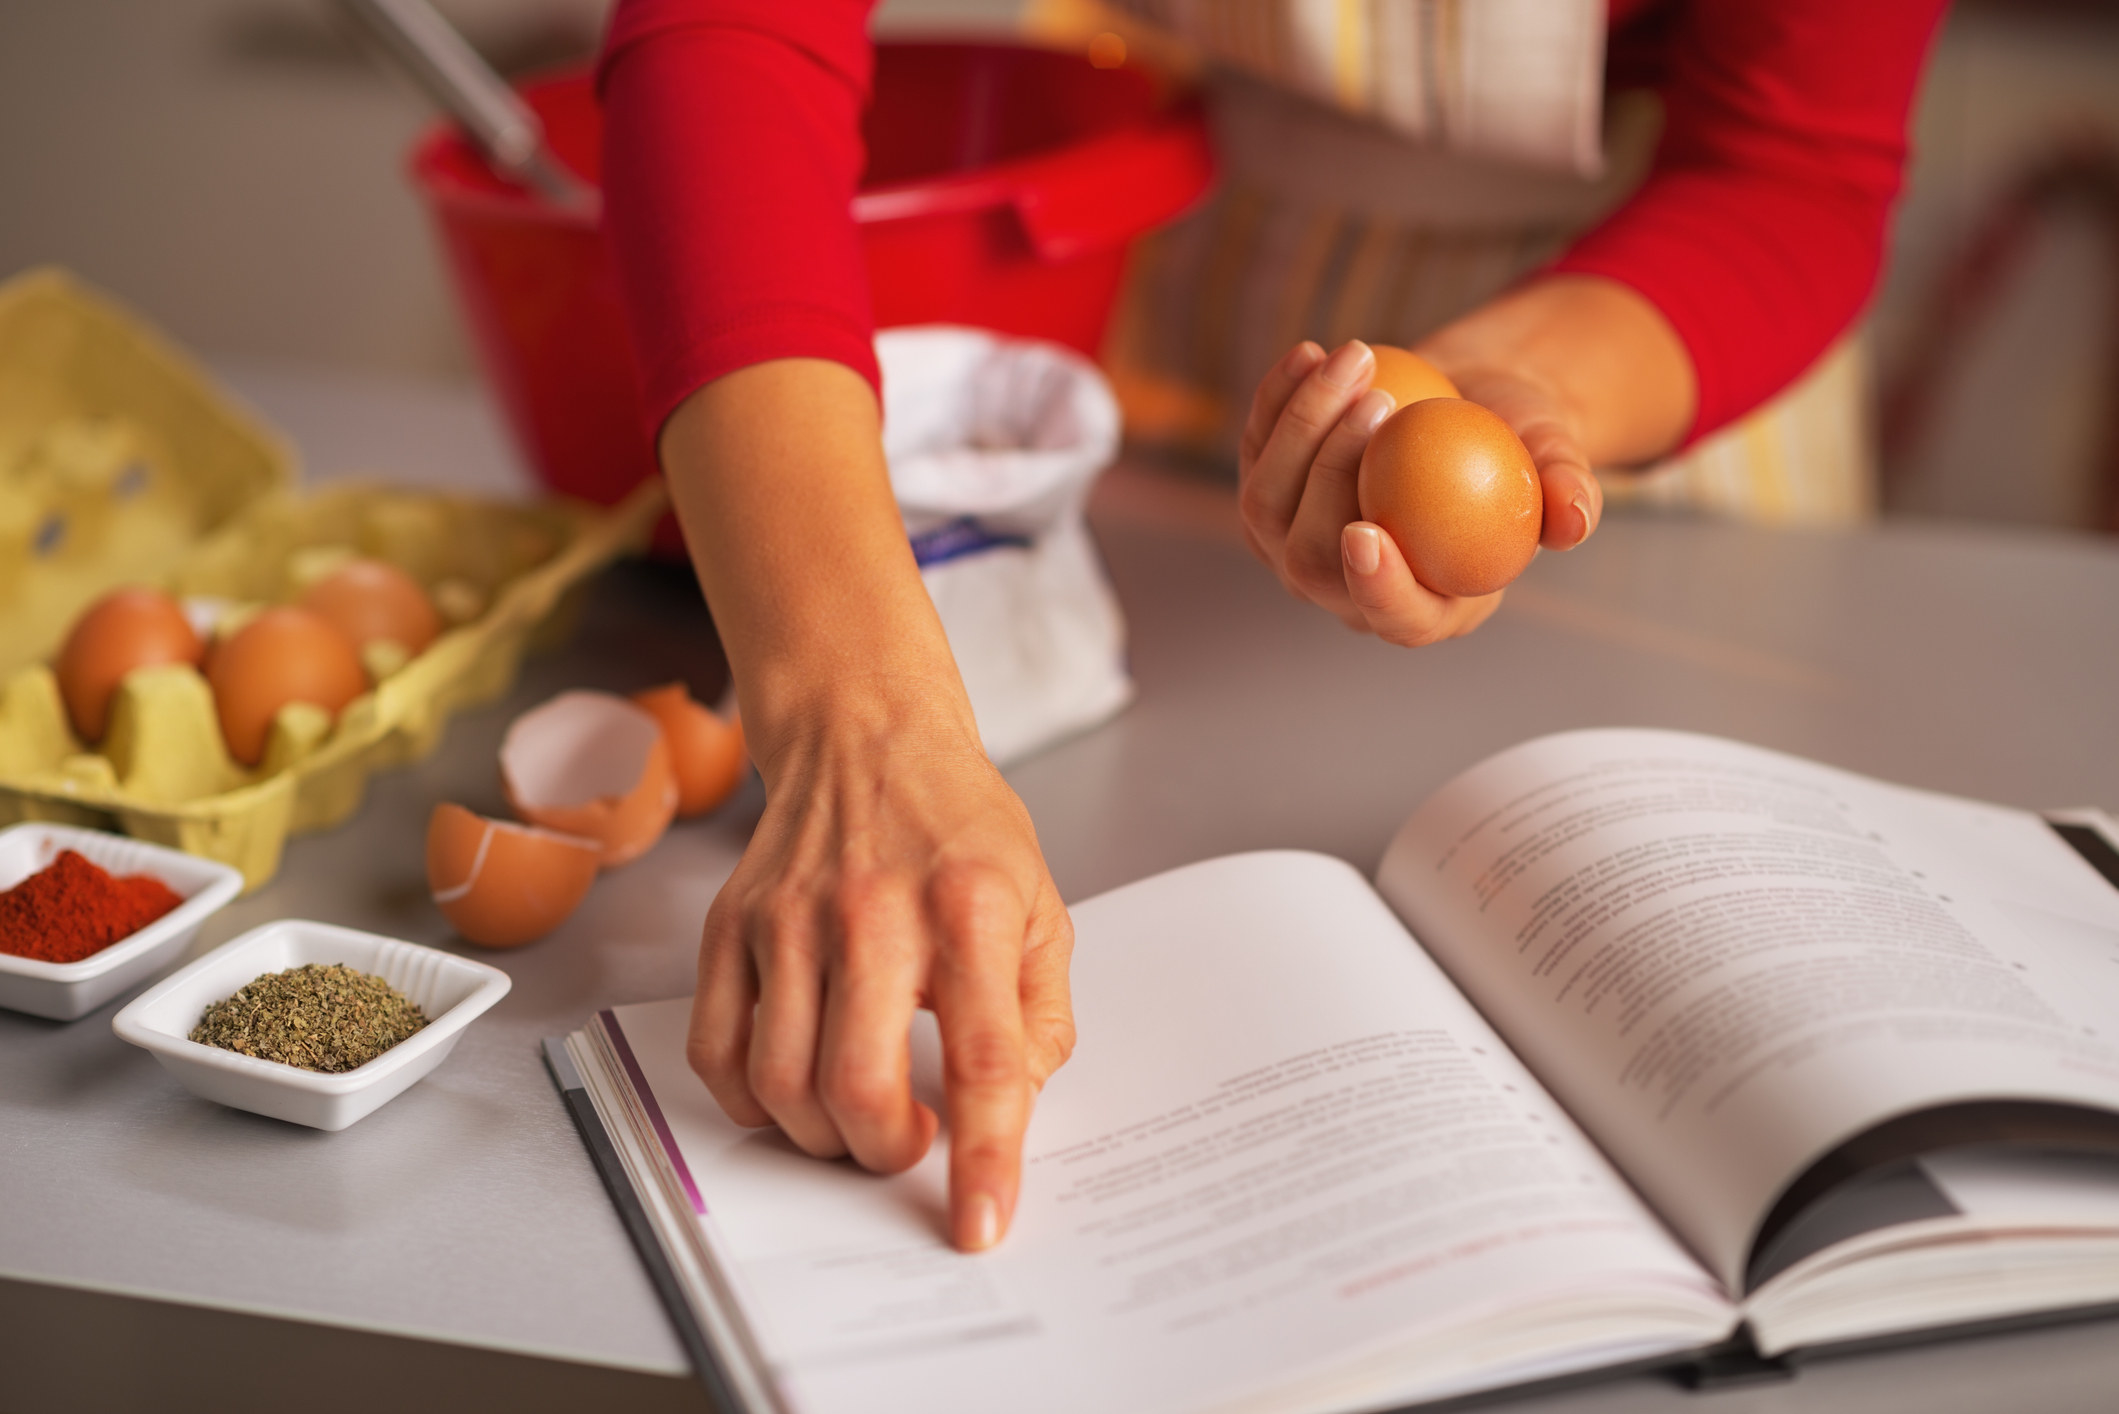 A woman holding eggs and using a cookbook.